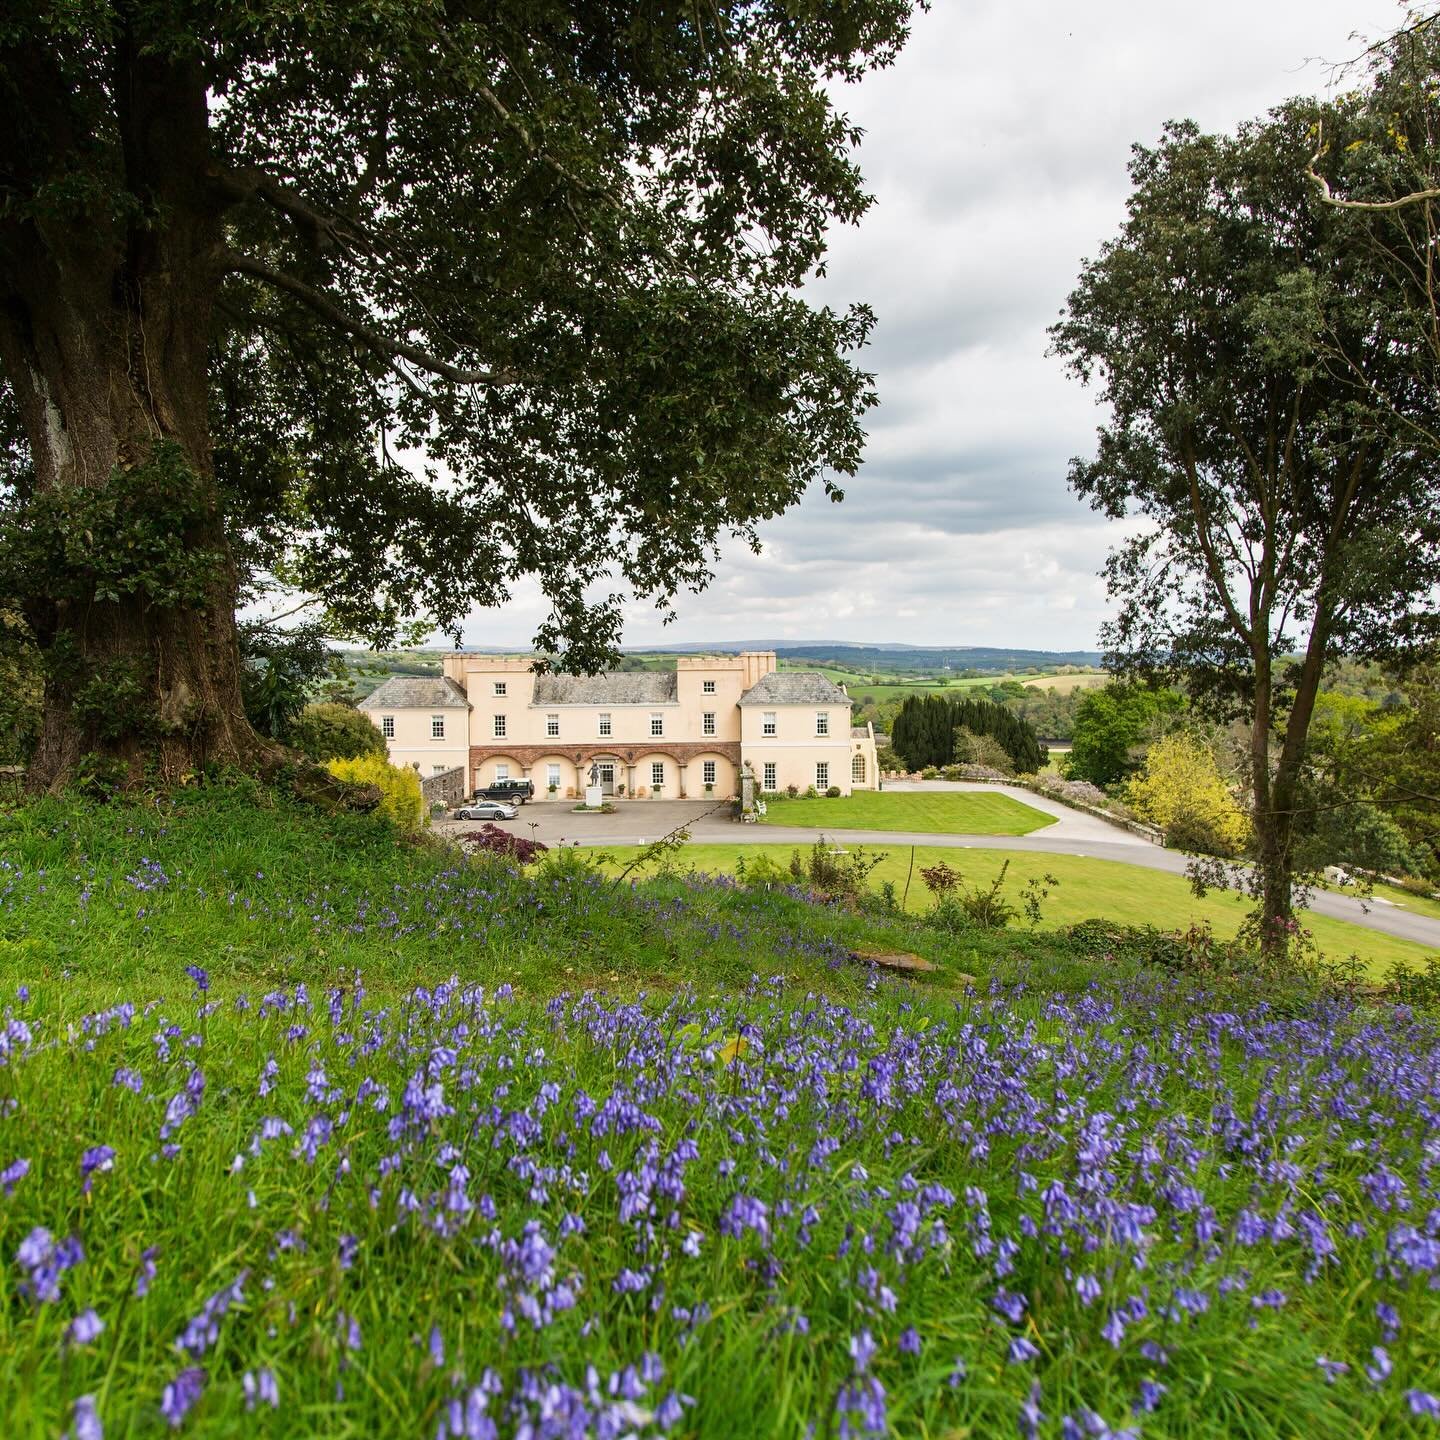 Far more breathtaking in person...

The gardens have been transforming everyday over the last few weeks filling the gardens with beautiful scents and colours!

We invite you to join us for our last Spring Garden Open Day on Sunday 19th May to take in